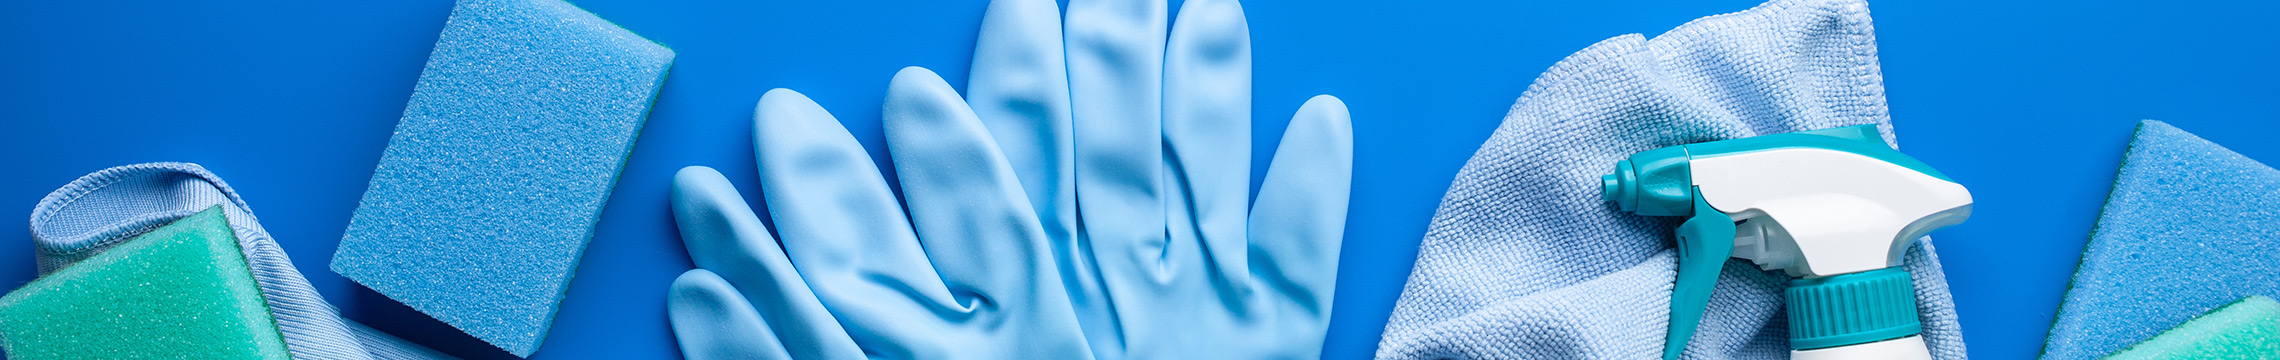 Cleaning chemicals, sponges, towels, and rubber gloves against a bright blue background